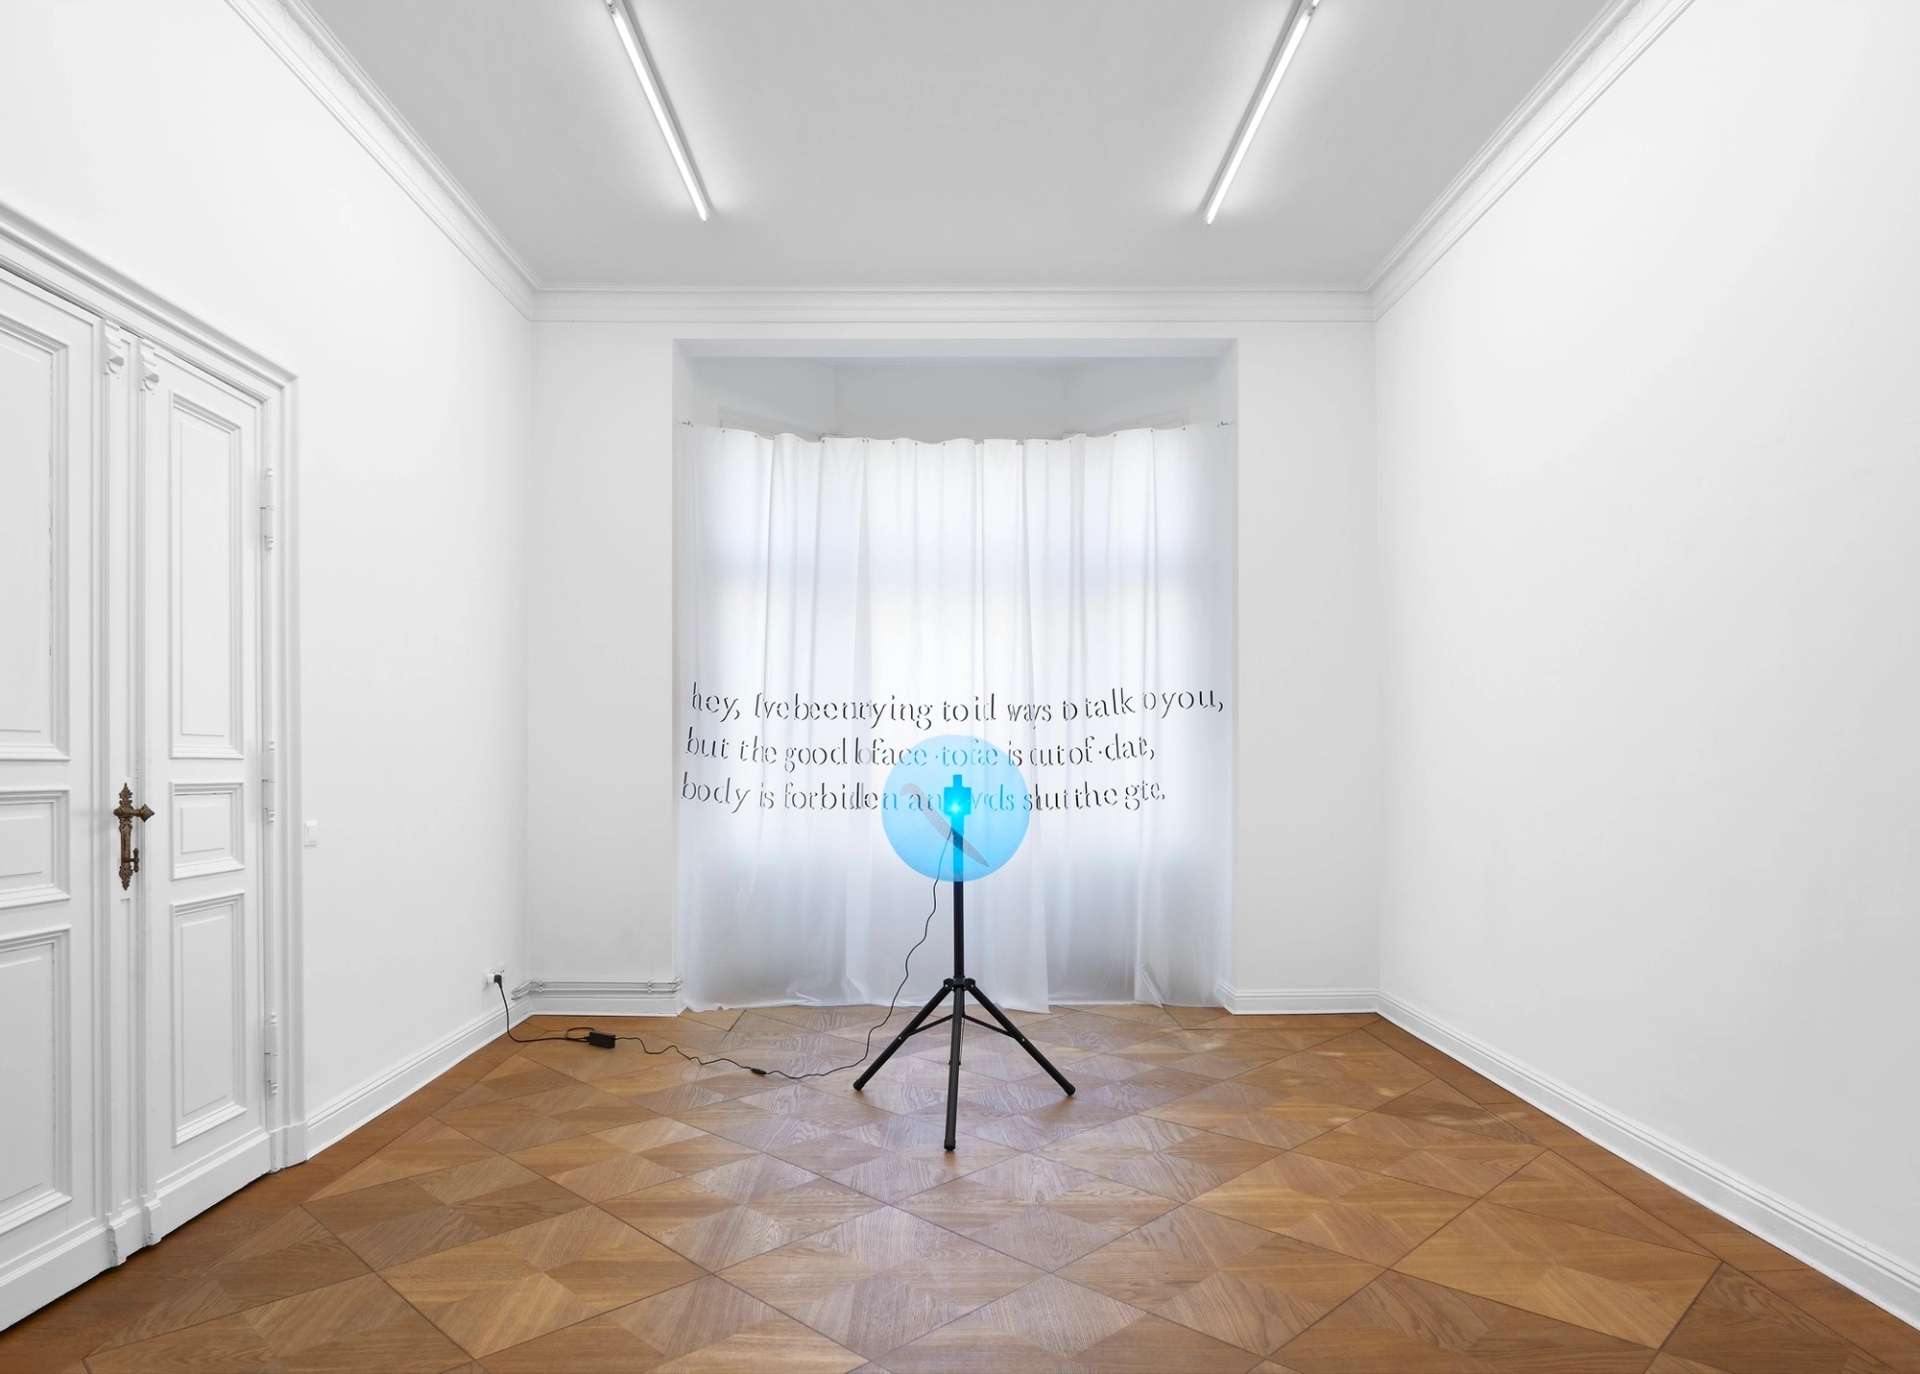 Shuang Li, INTRO TO CIVIL WAR, 2019. Installation view. Courtesy of the artist and Open Forum.